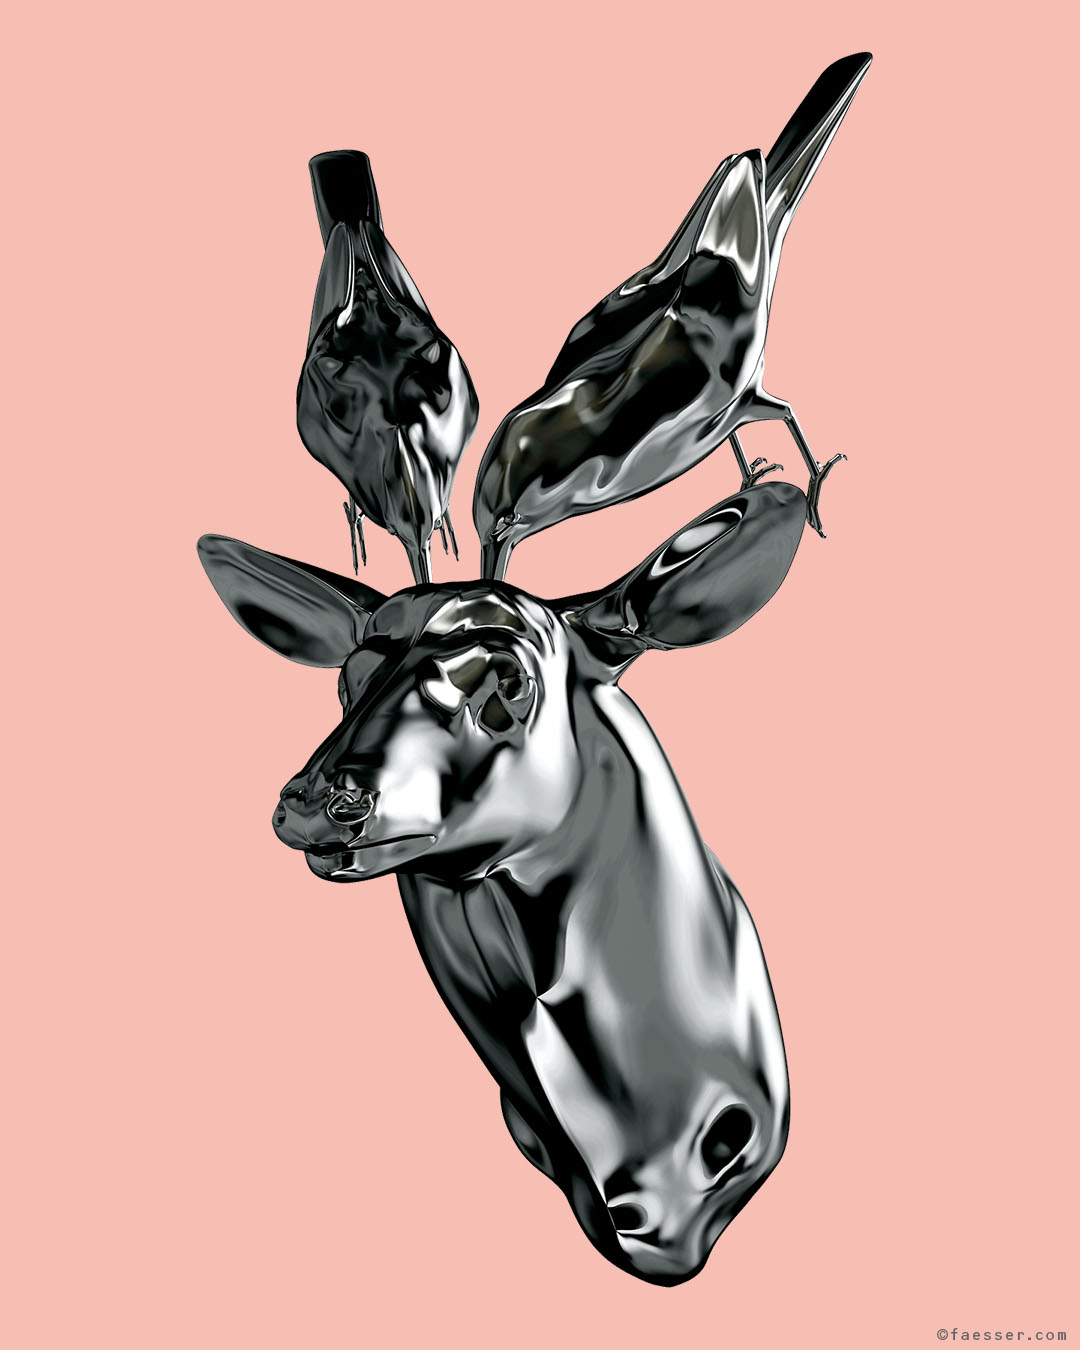 Entire chrome deer trophy with two little antlers birds as Brain Pickers; work of art as figurative sculpture; artist Roland Faesser, sculptor and painter 2017